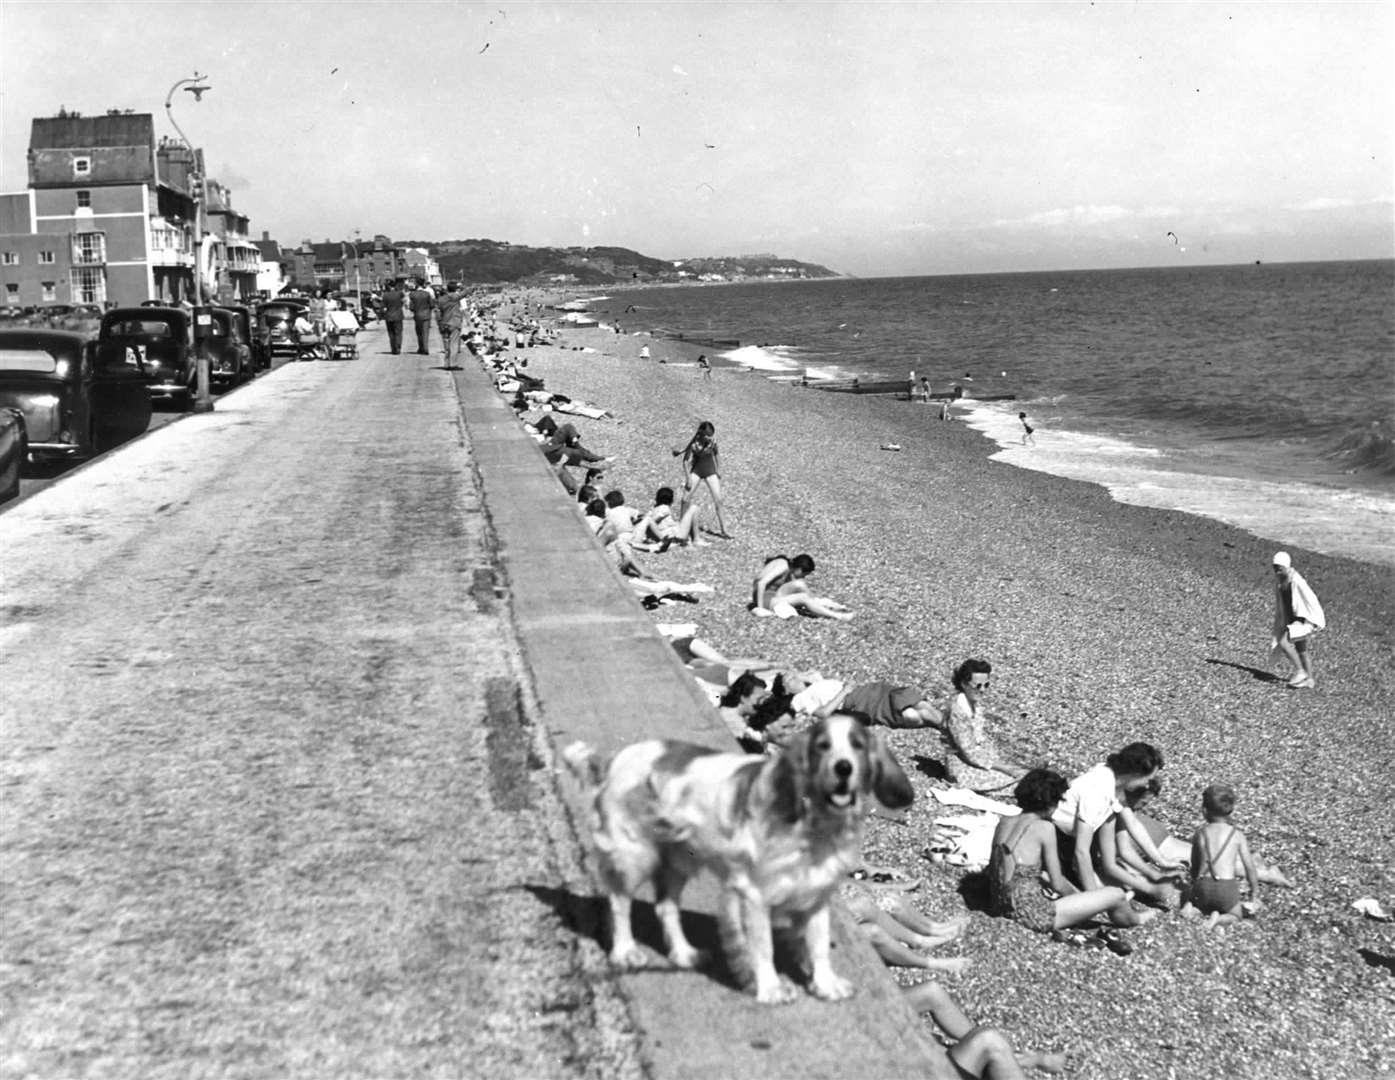 The promenade at Hythe in October 1951